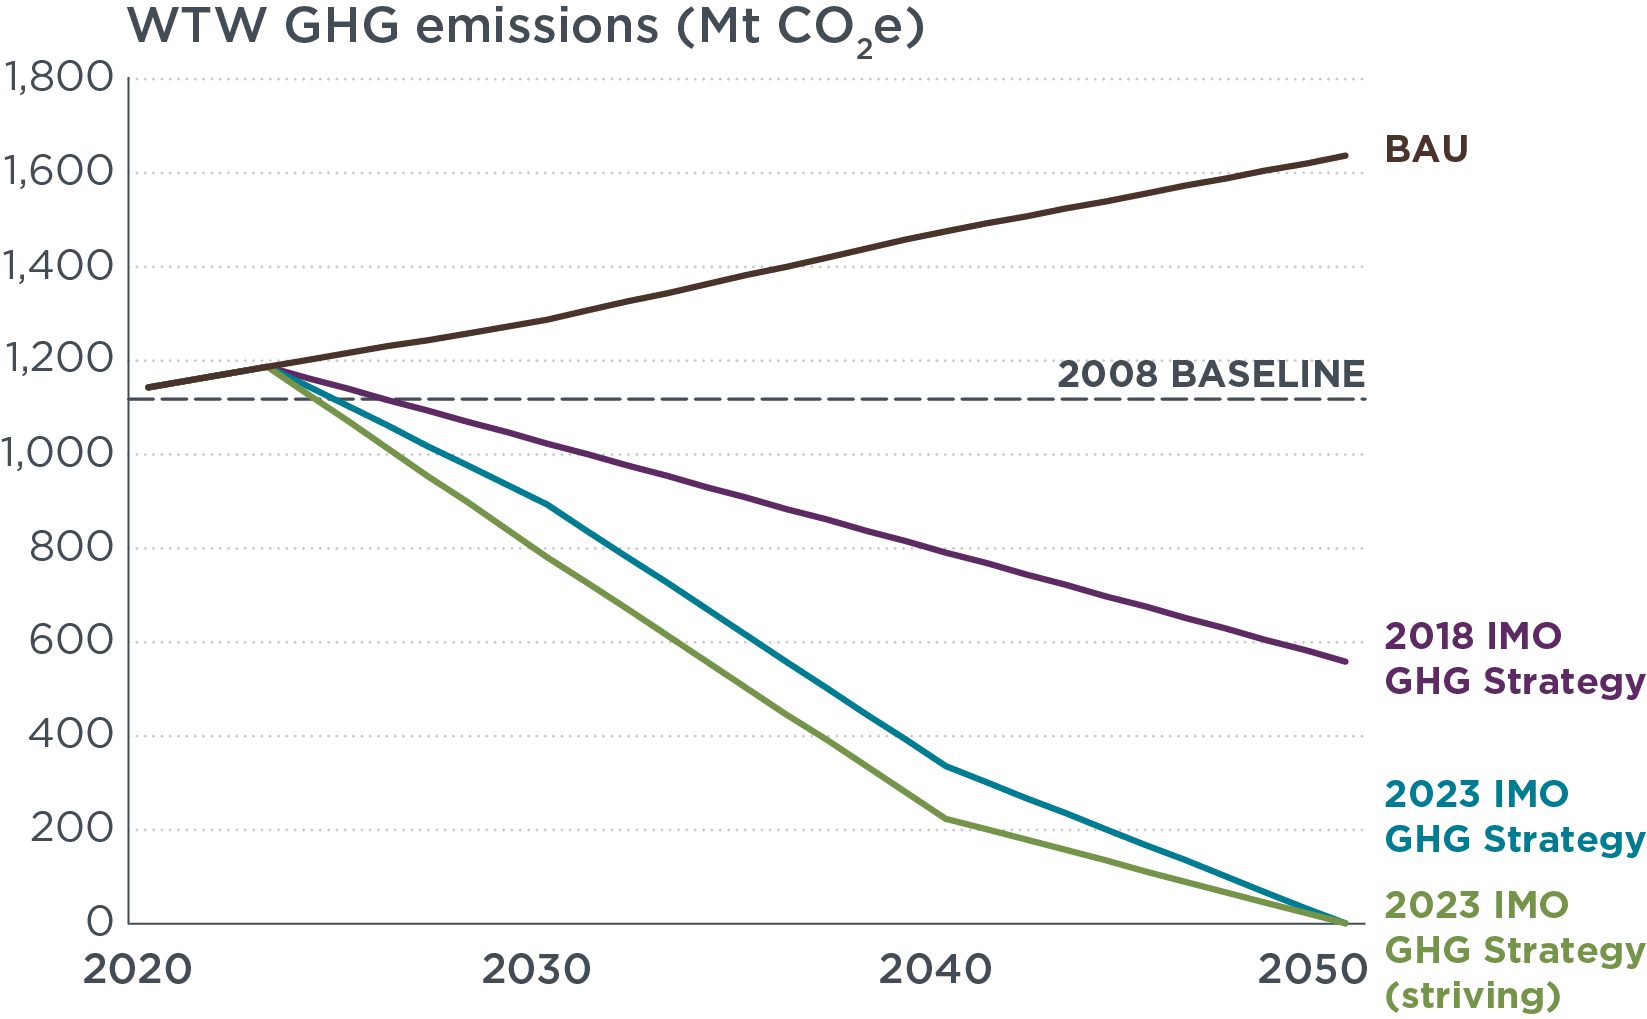 Line chart shows BAU emissions in 2050 above 1,600 Mt, the 2008 baseline at a little above 1,100 Mt, the 2018 strategy just below 600 Mt, and both 2023 strategy lines reaching zero in 2050